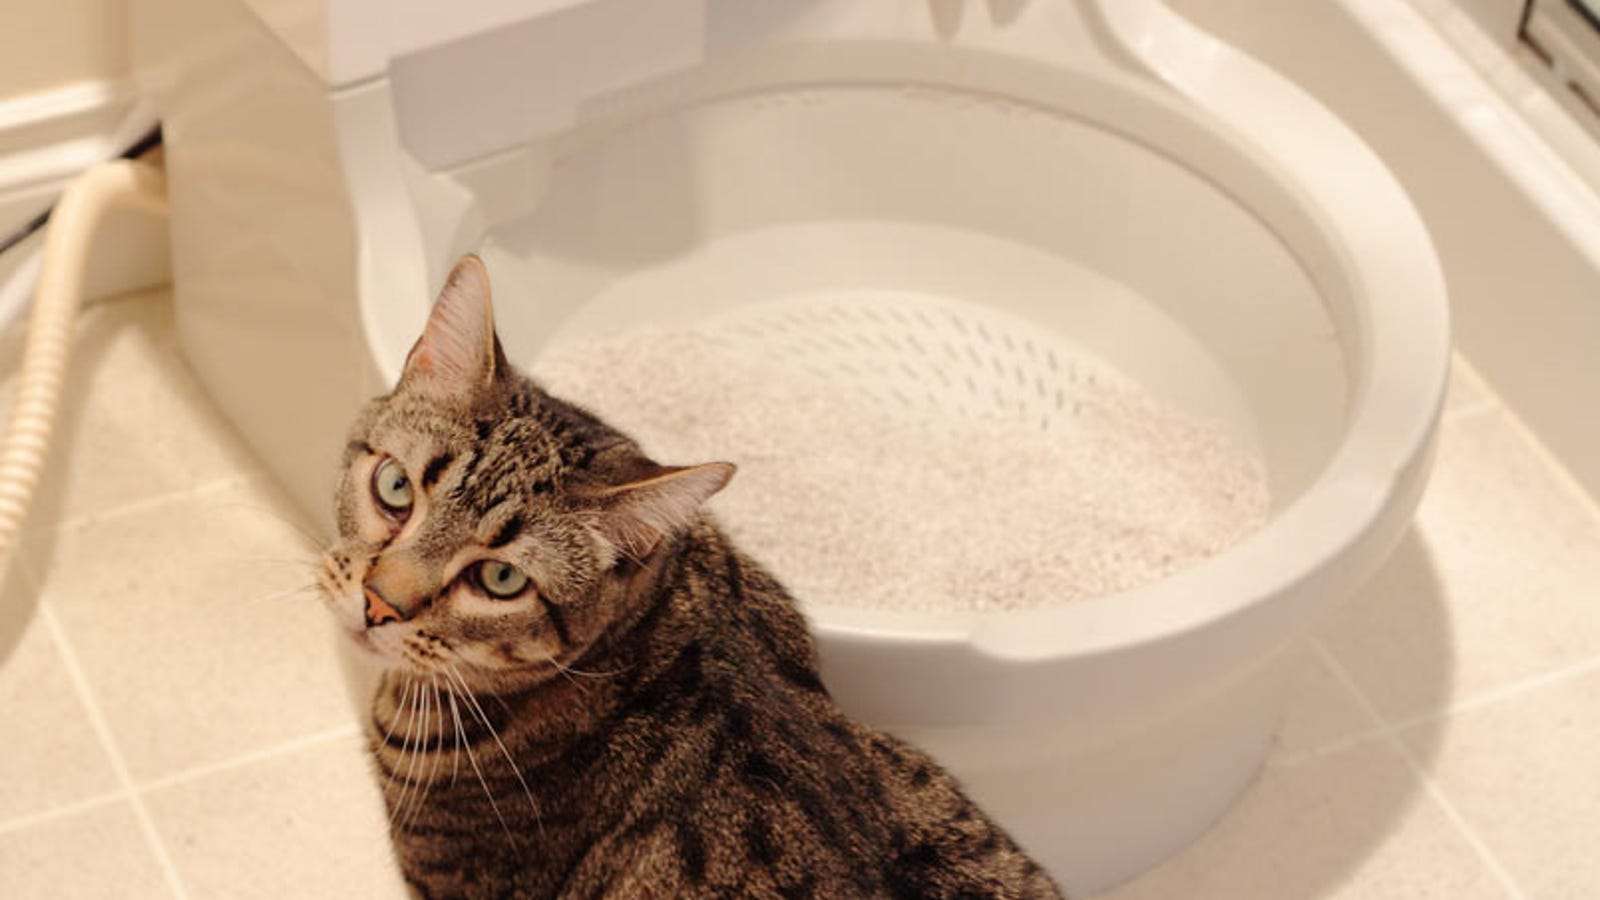 CatGenie Litter Box: The Clean Fresh Smell of Civilization ...